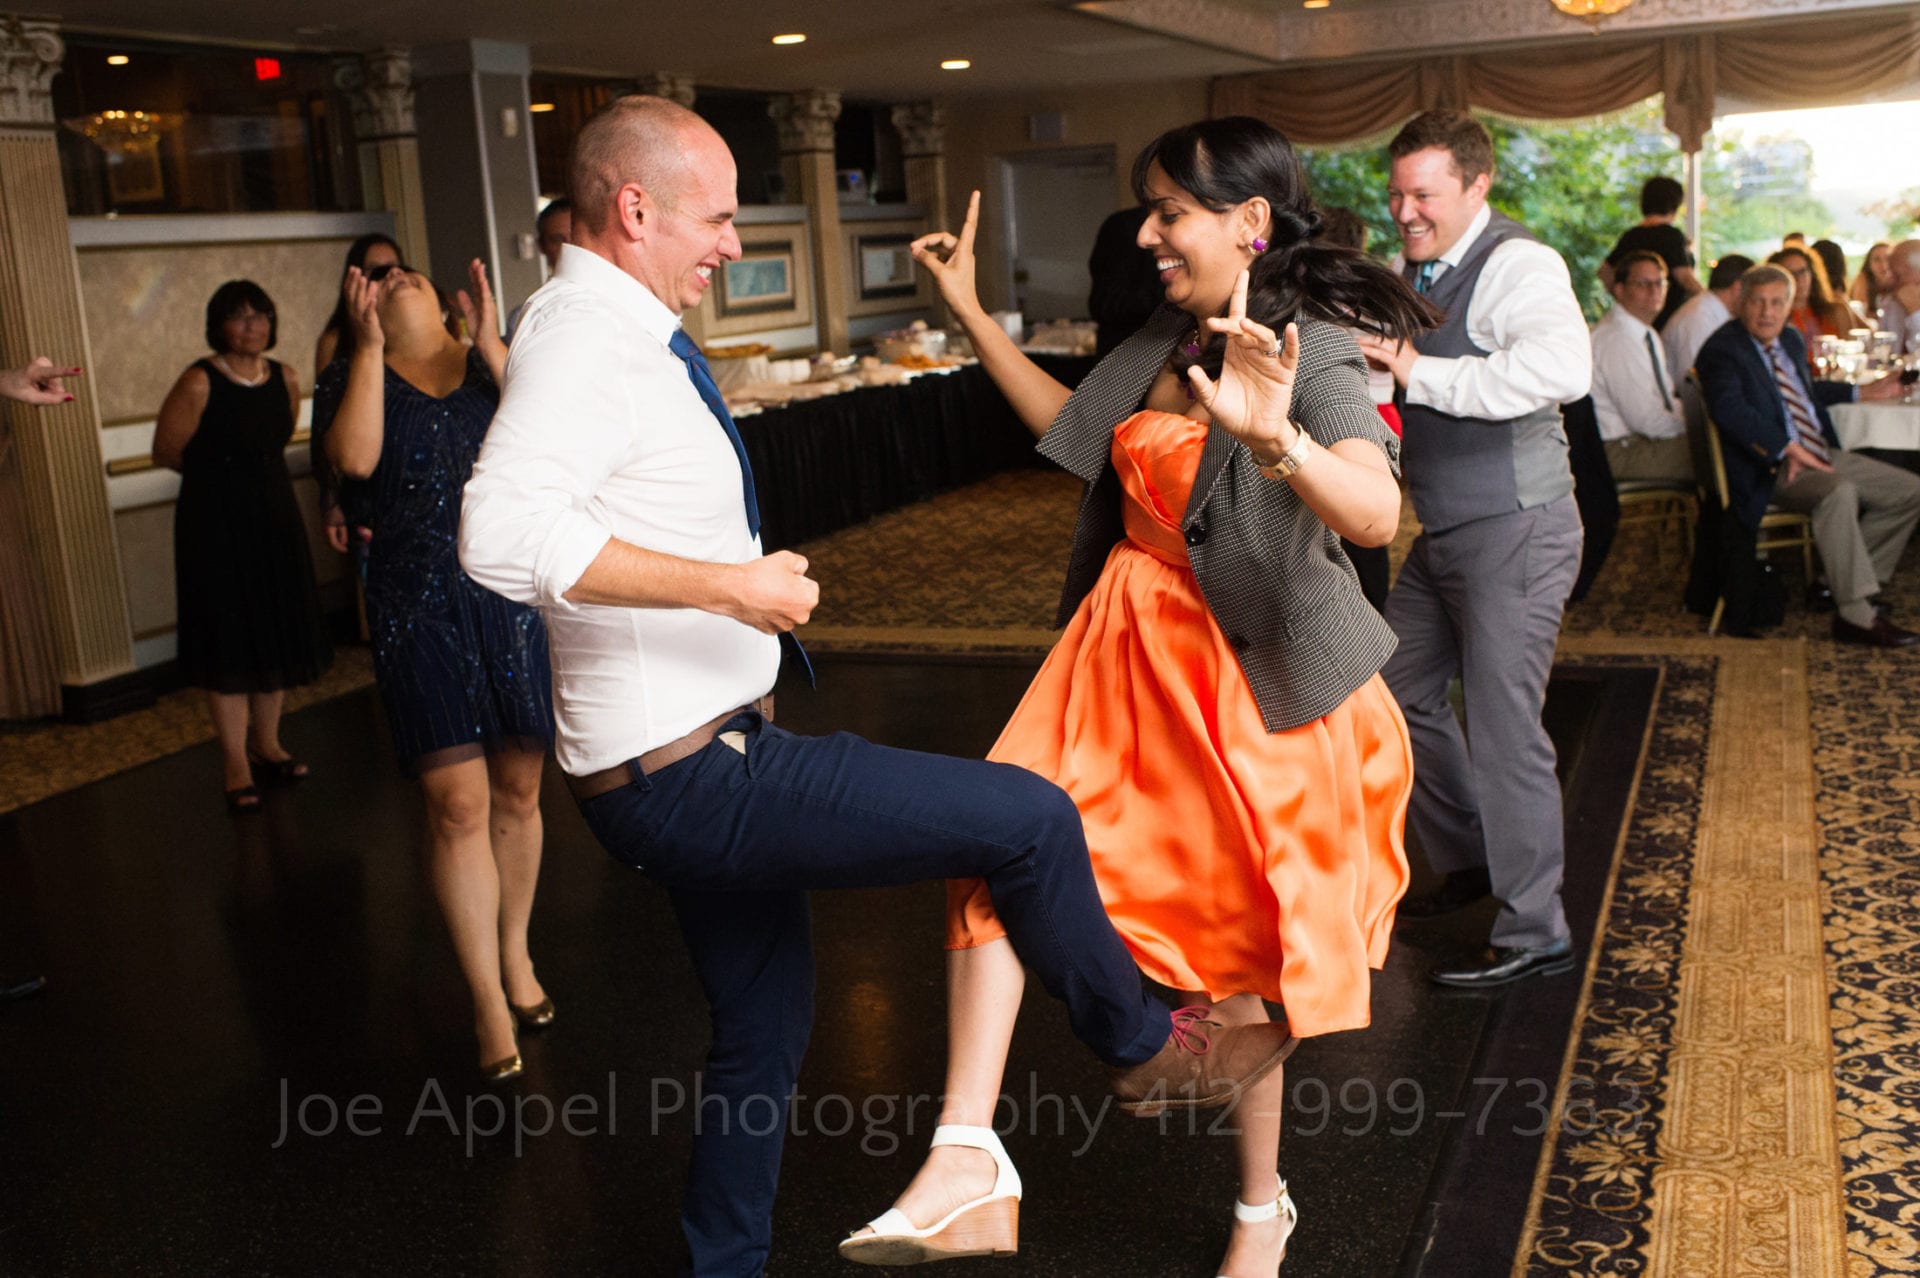 A woman in an orange dress and a man in a white shirt hook their legs together as they dance.